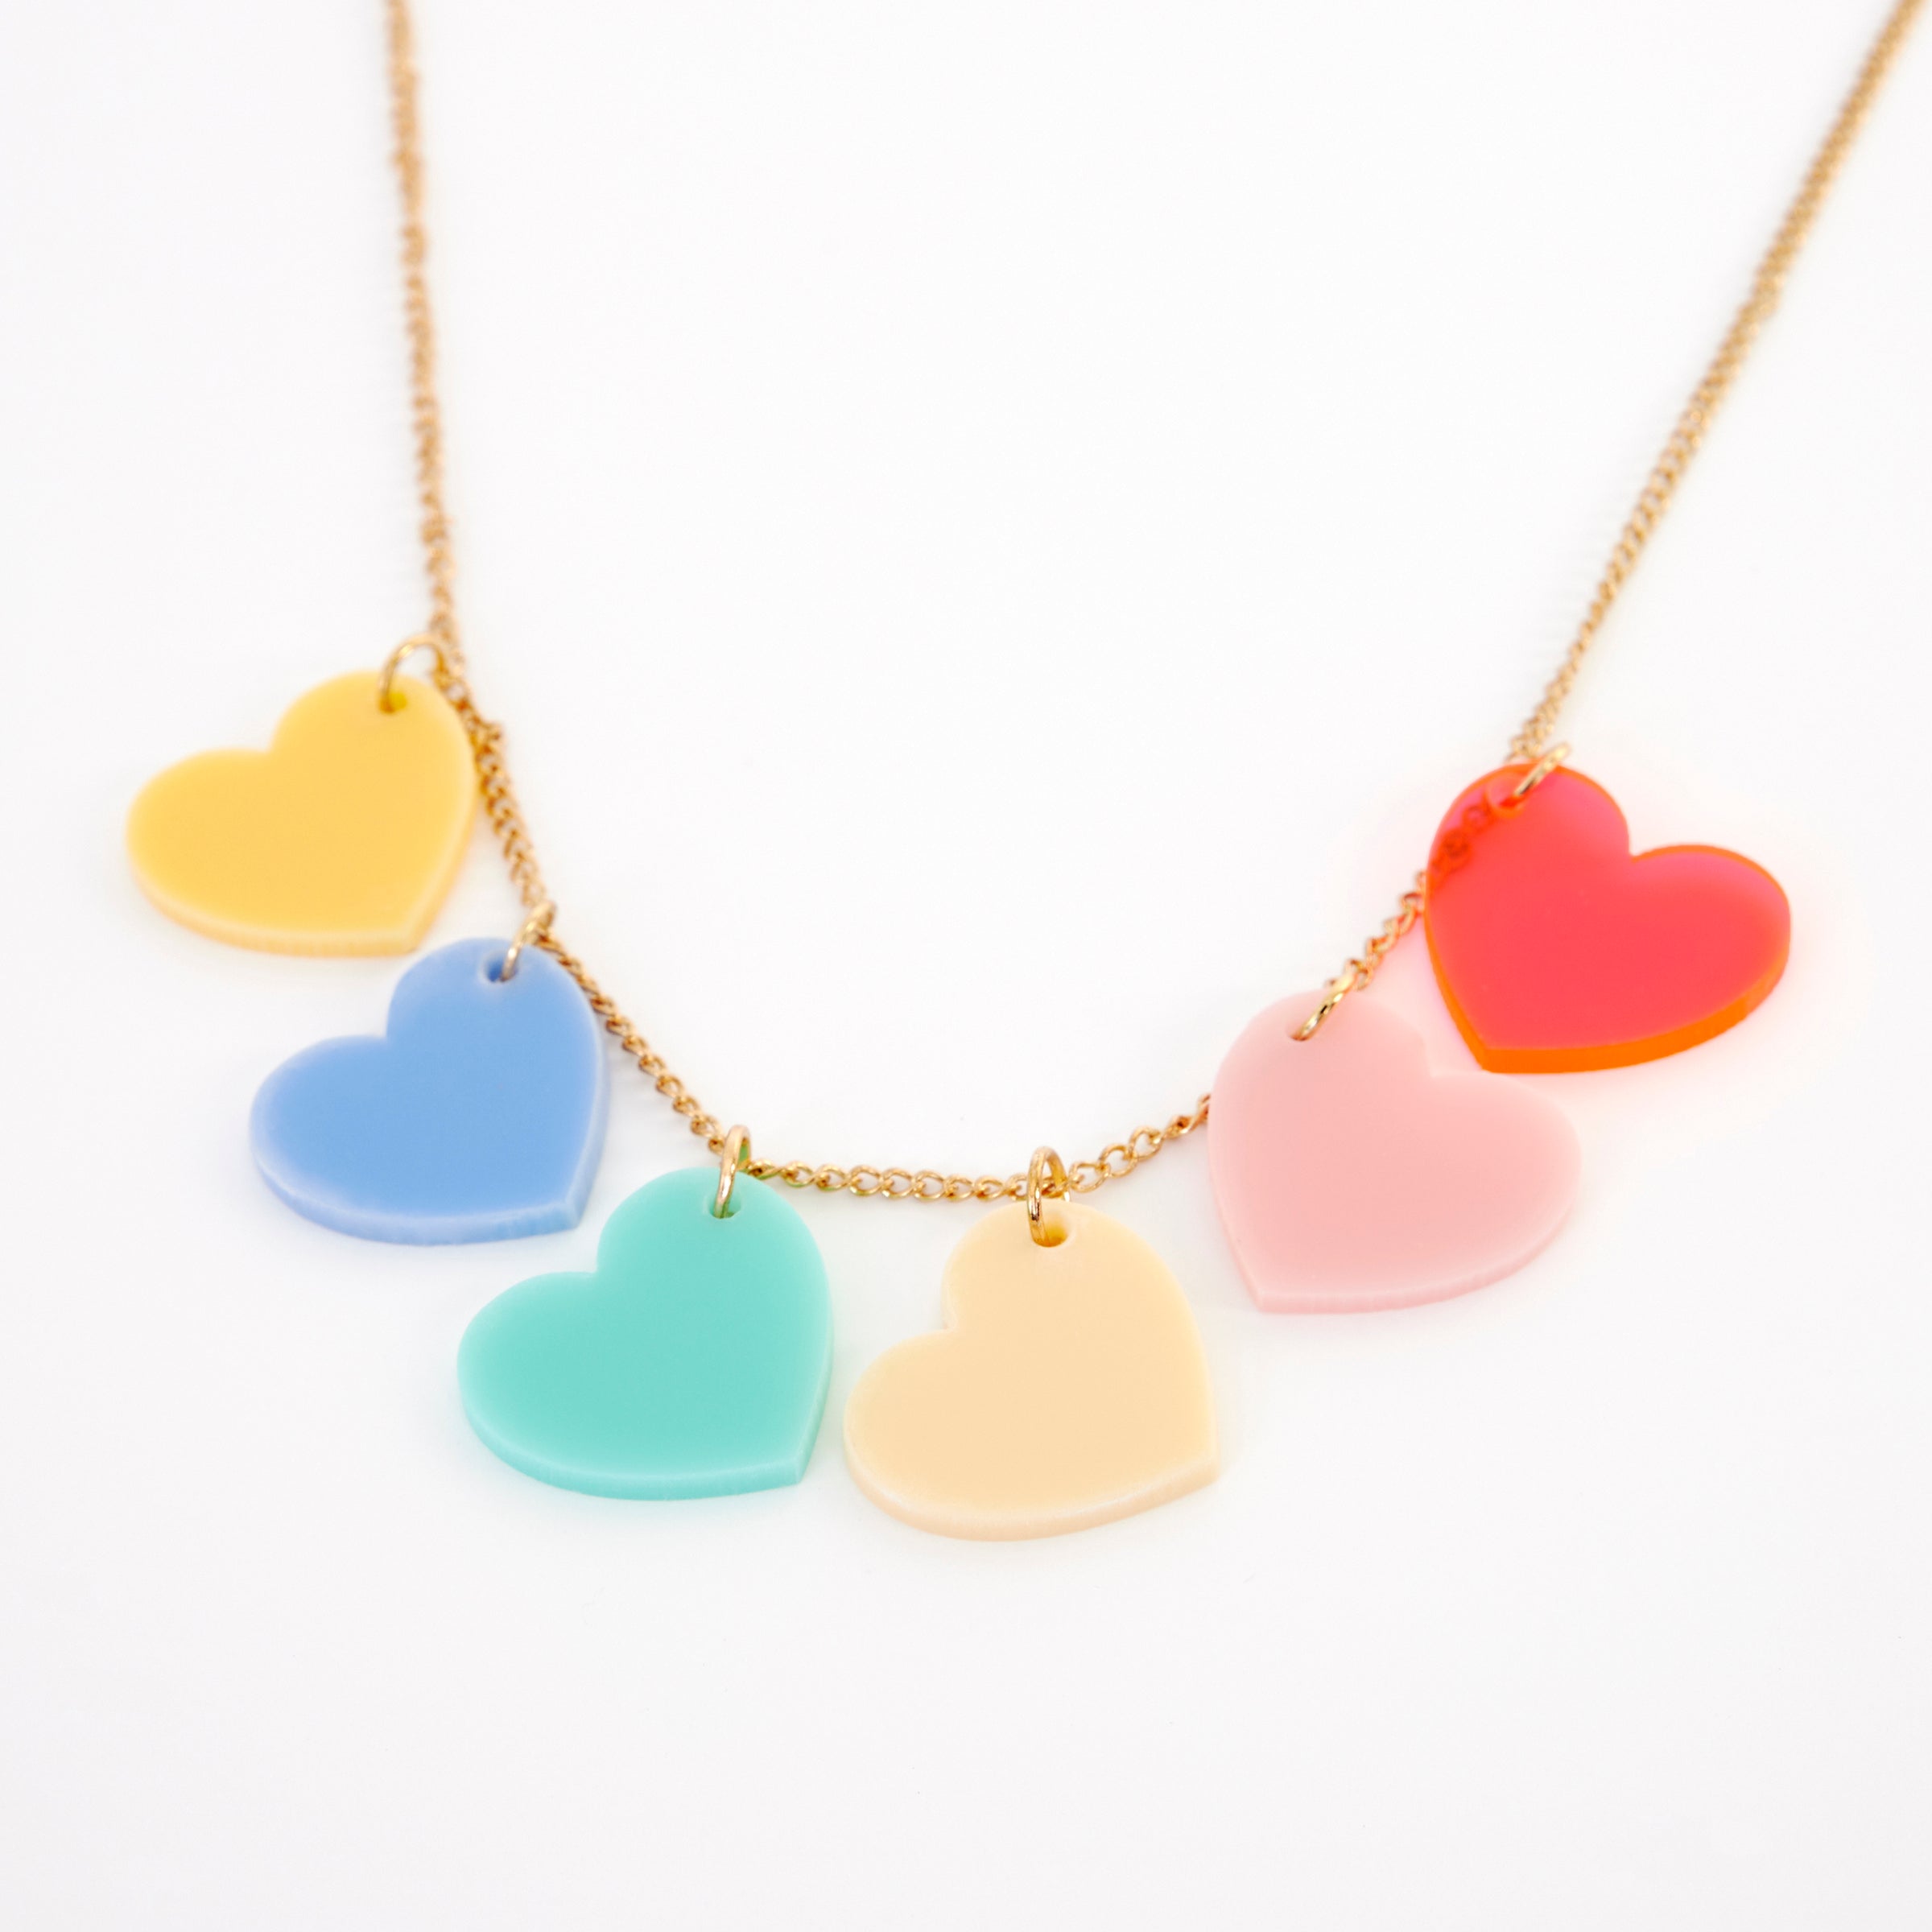 Our heart necklace, with lots of pretty coloured hearts, is perfect as a Valentine's Day gift for kids.